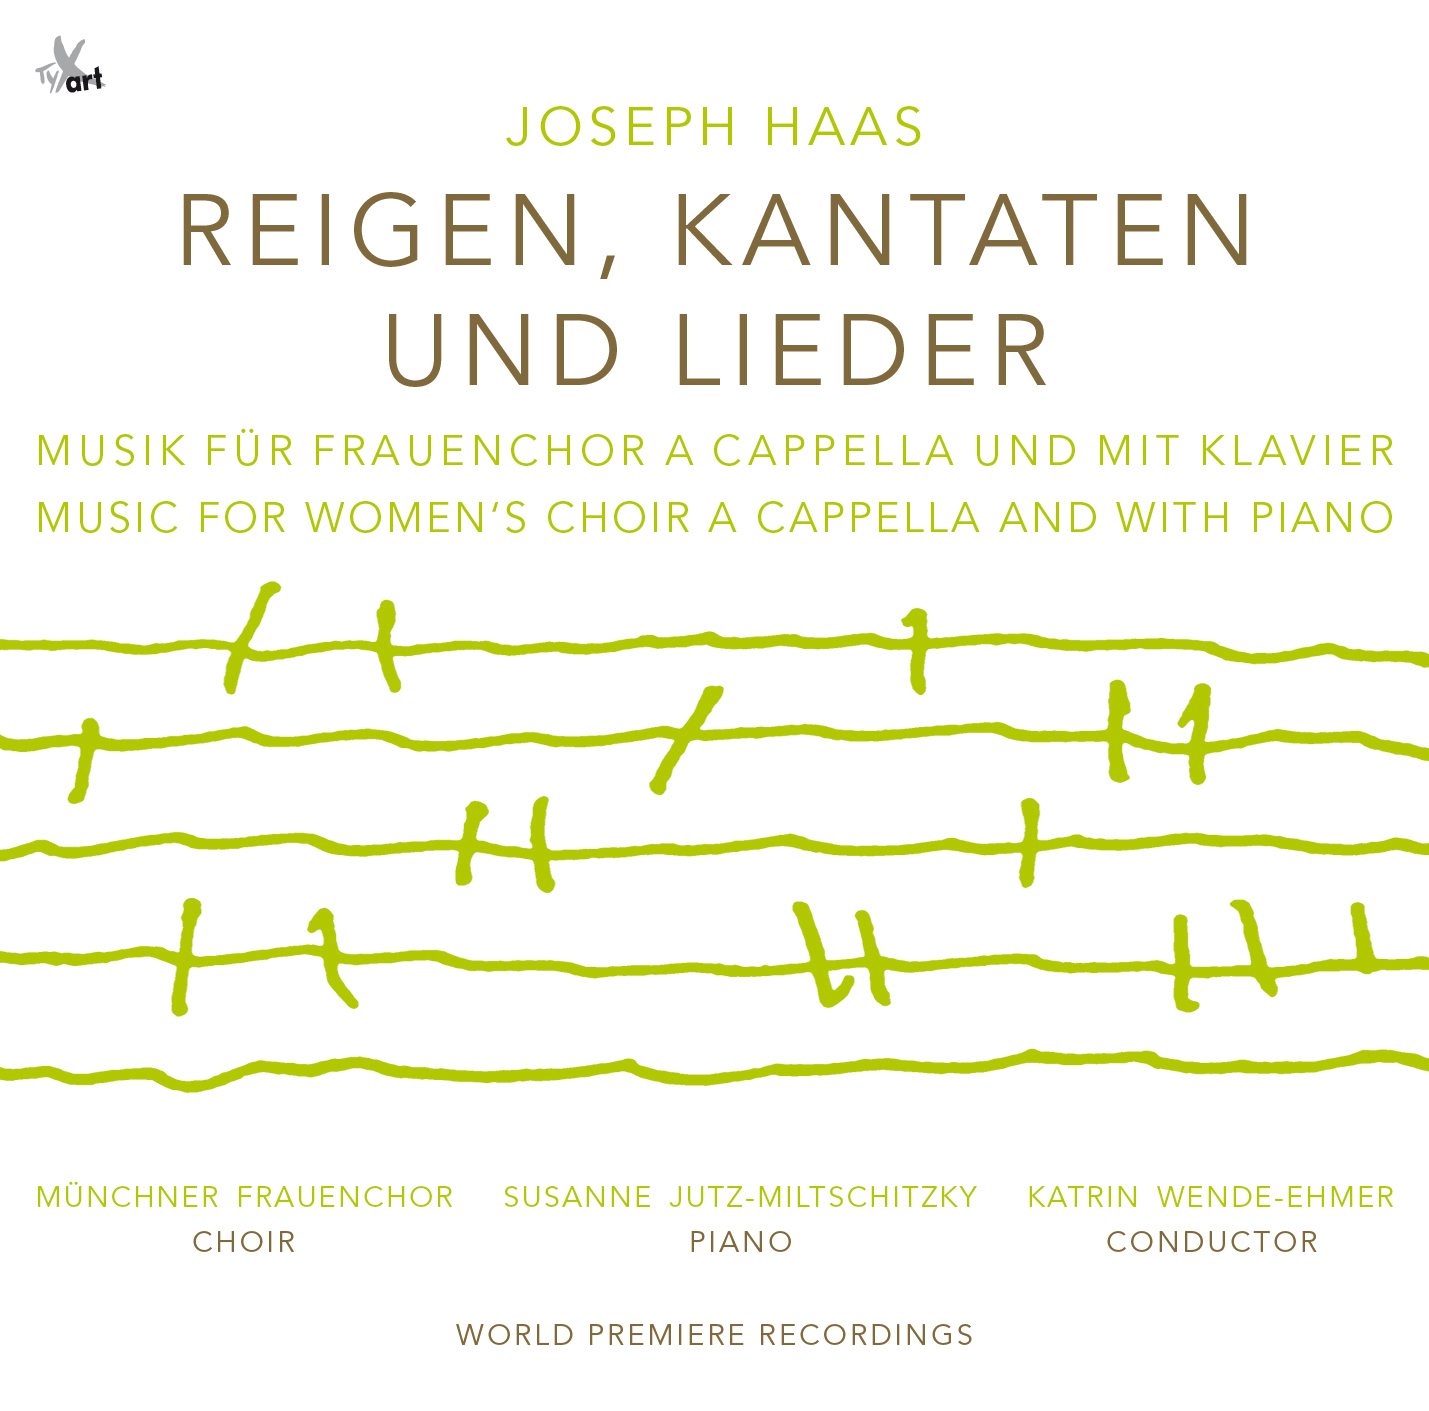 Joseph Haas: Folk Song Selections, Cantatas and Lieder